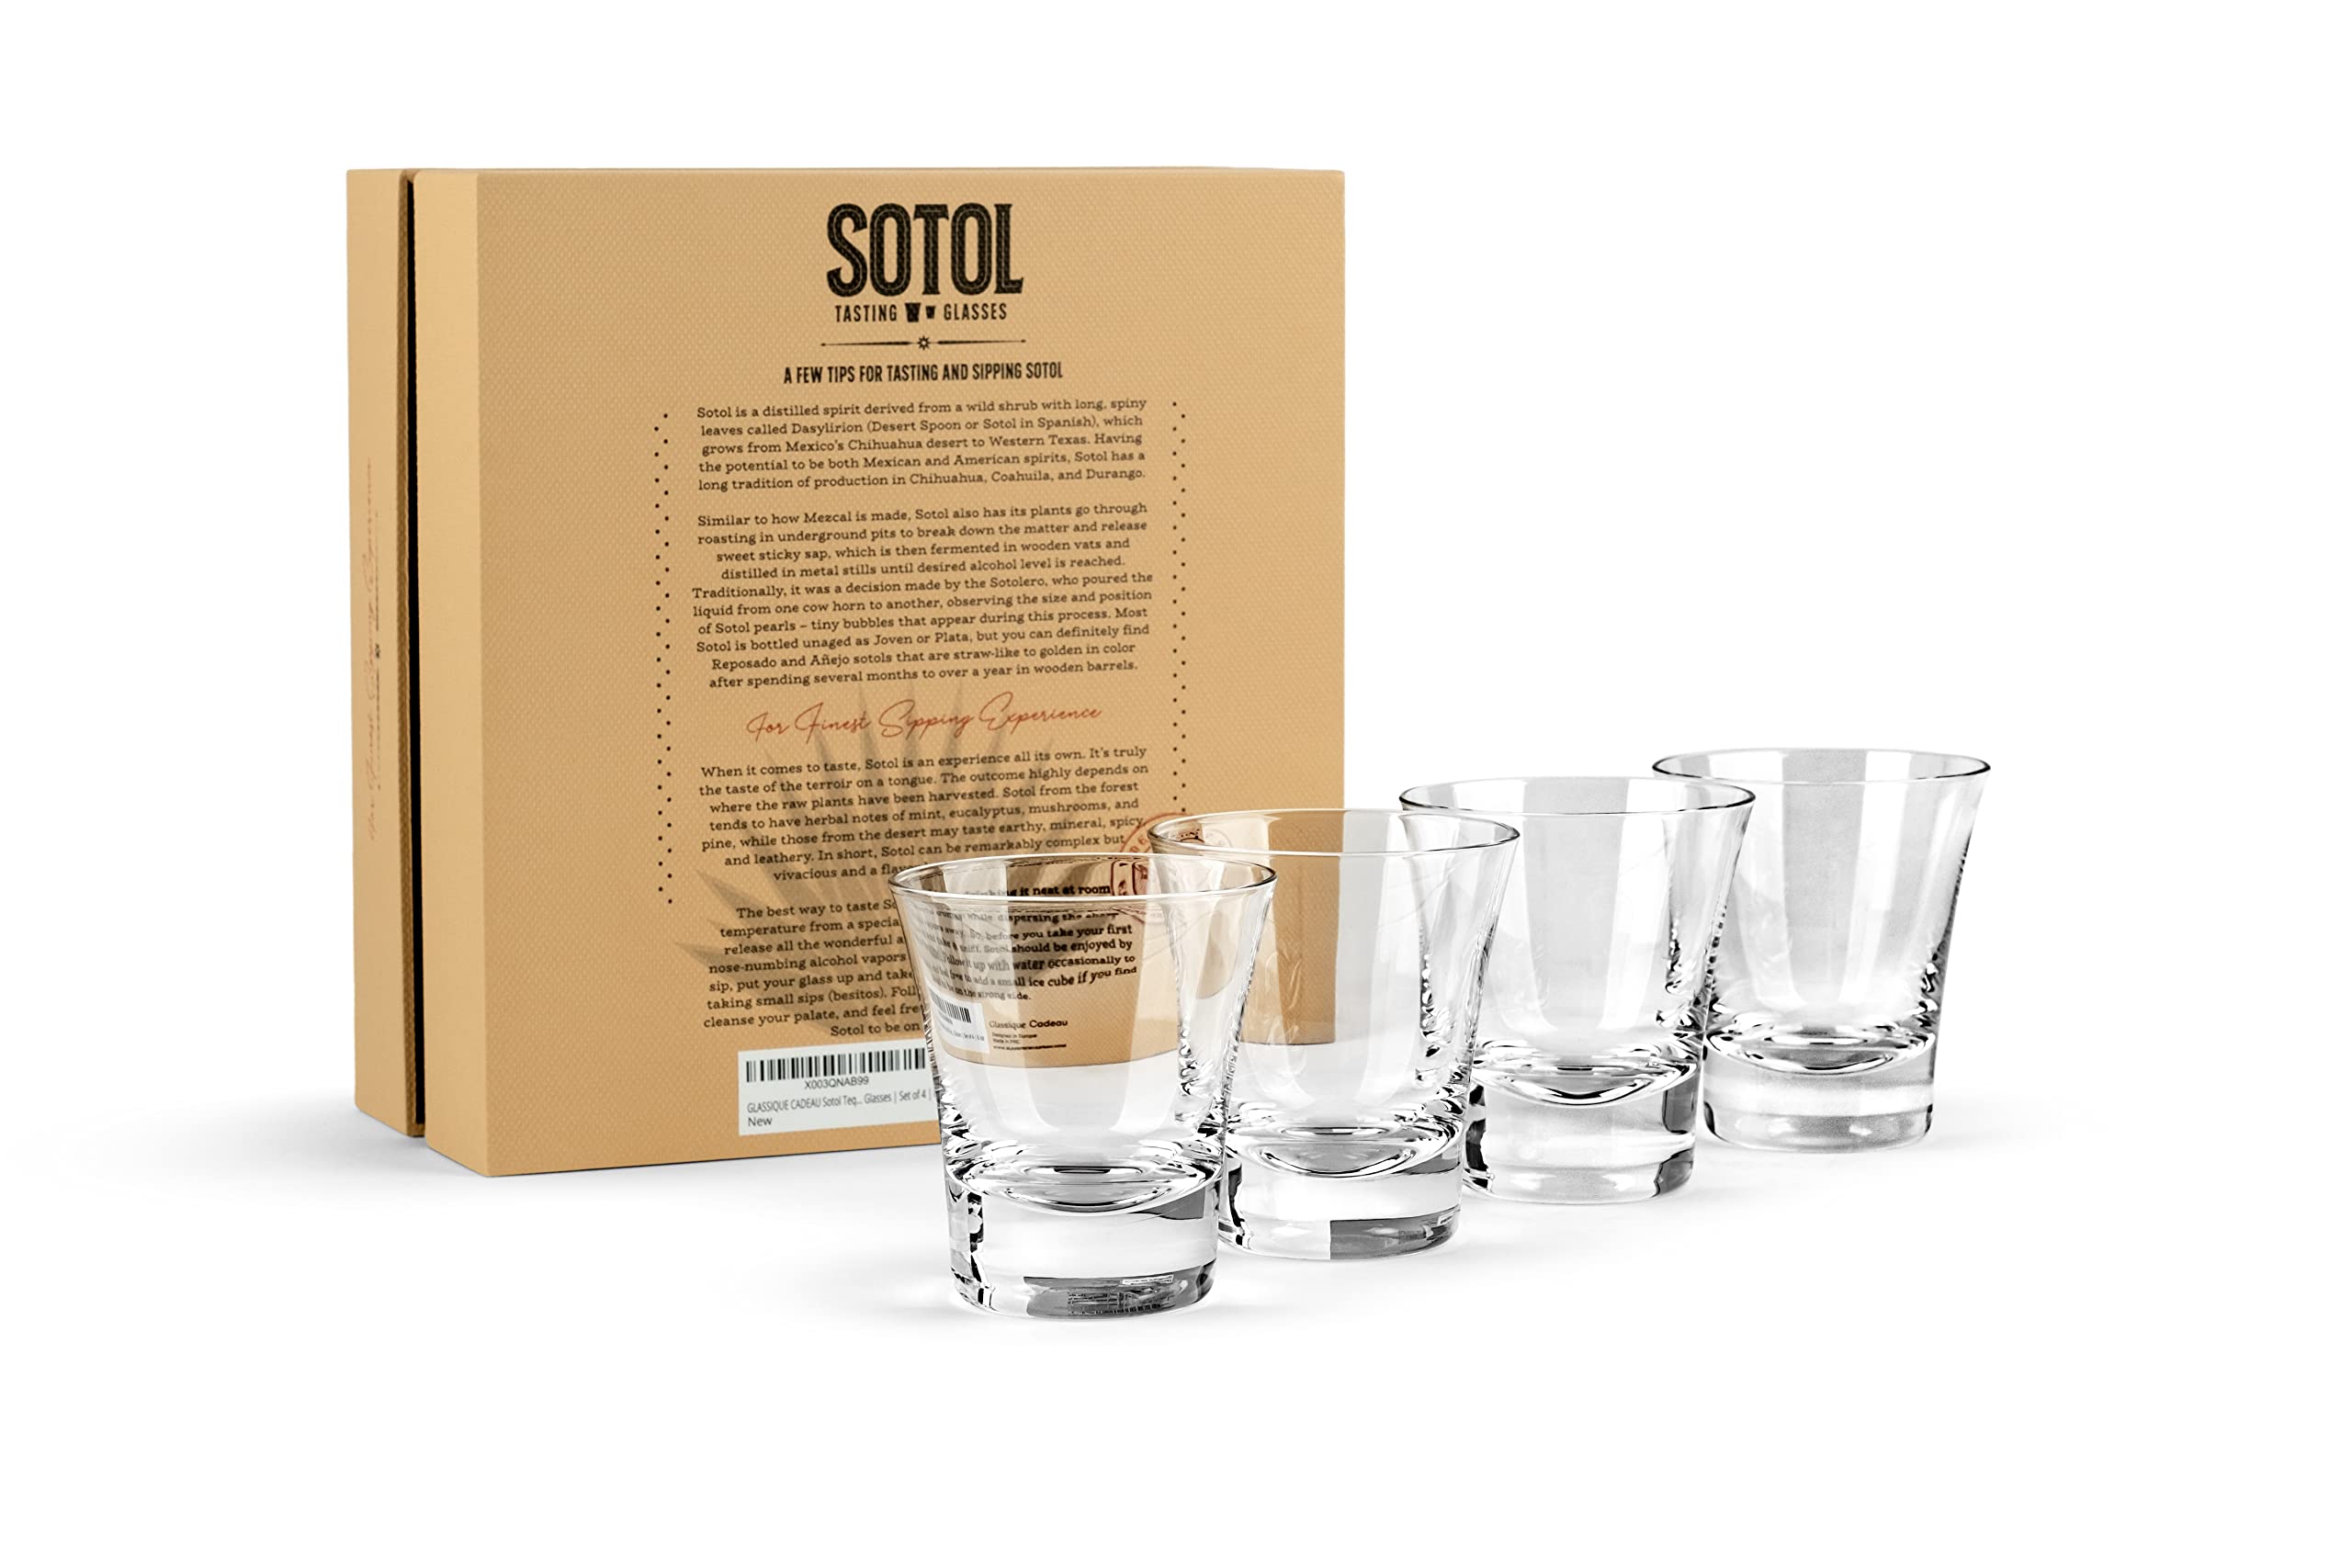 Sotol and Tequila Sipping Glasses | Tequila Glassware Collection | Set of 4 | 6 oz Professional Sippers for Drinking Joven, Reposado, Anejo Sotols | Stemless Heavy Based Liquor Snifters